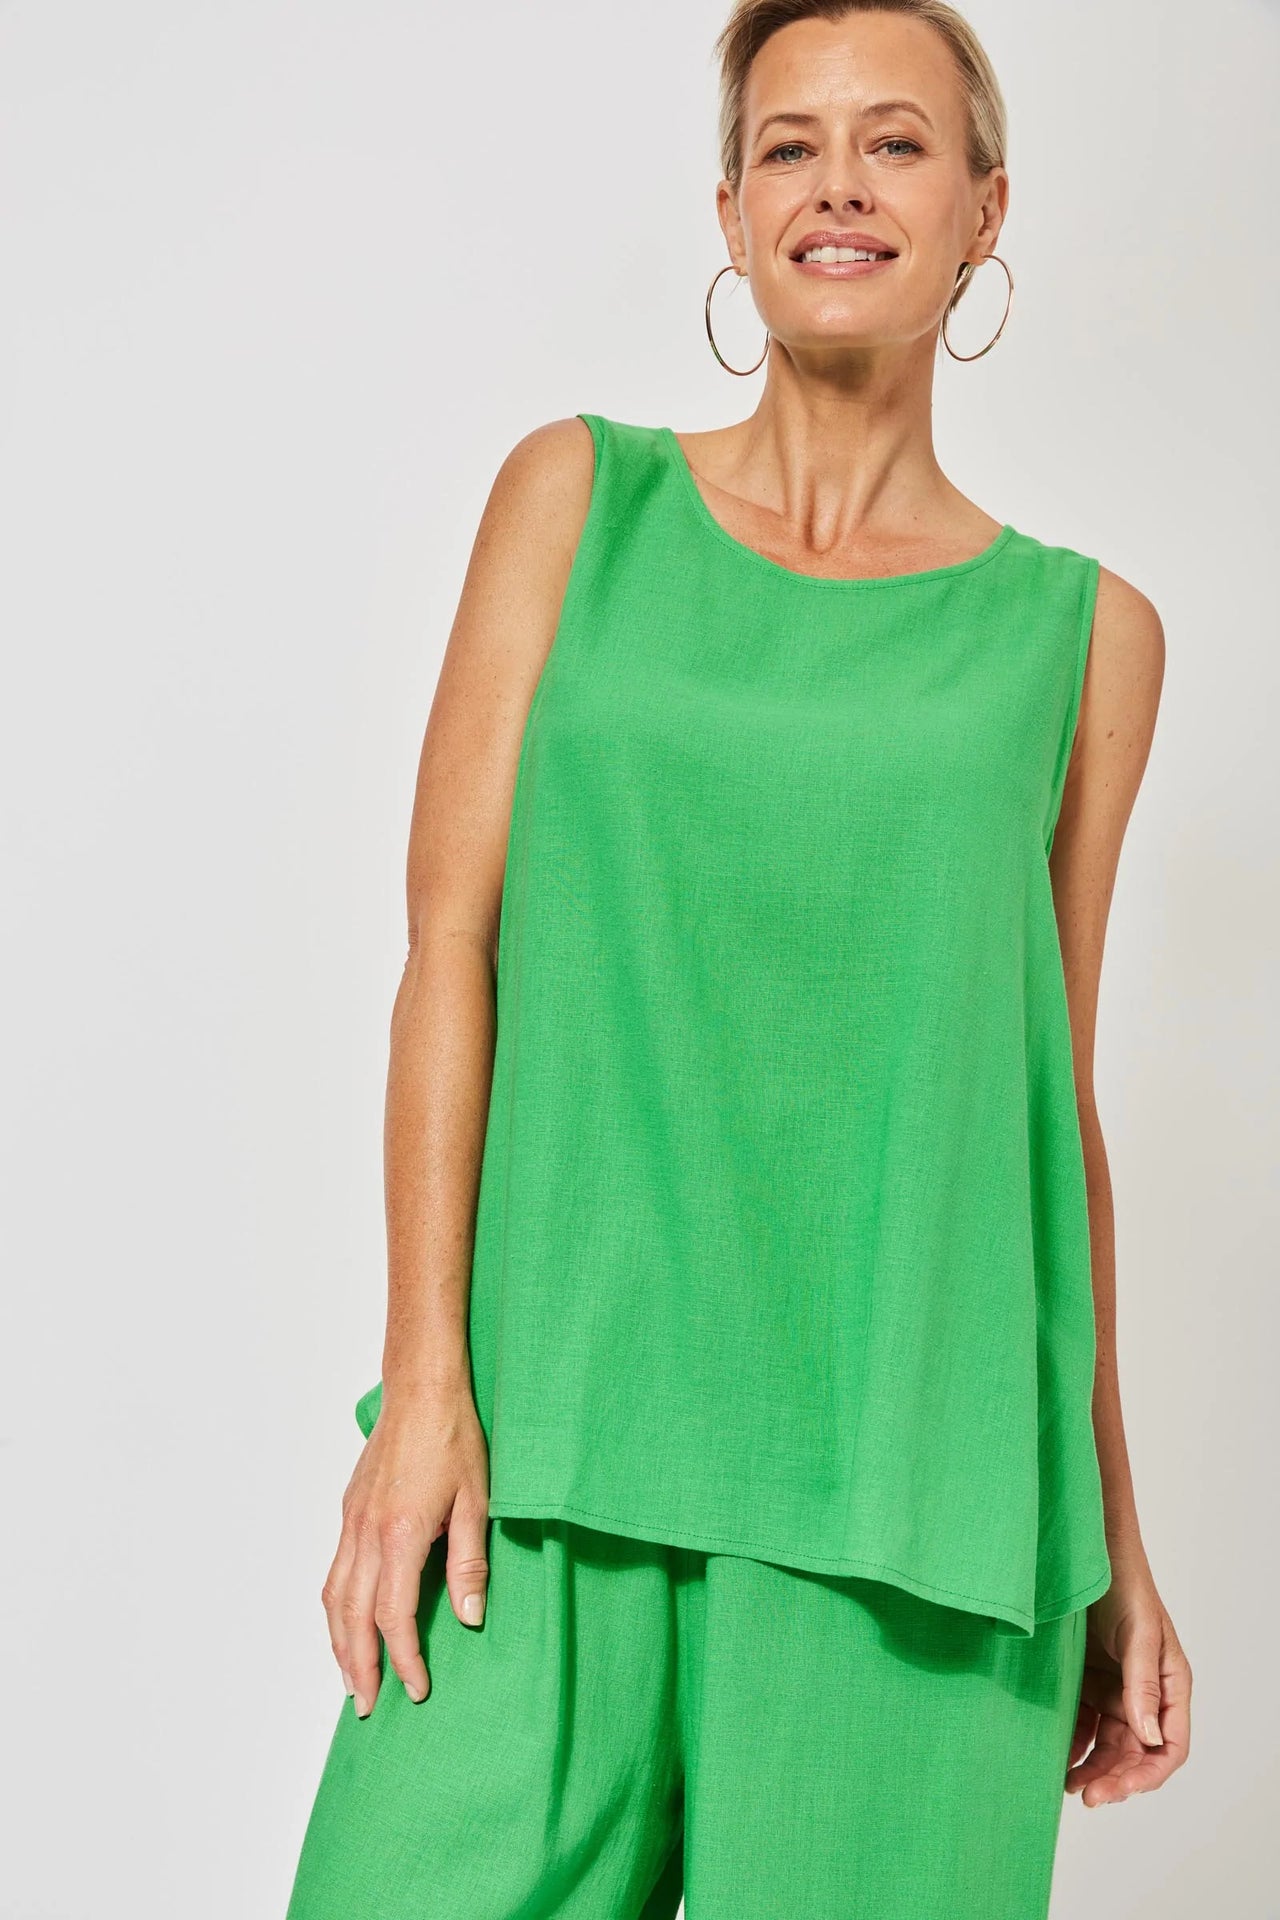 Haven St Barts Key Lime Tank Top